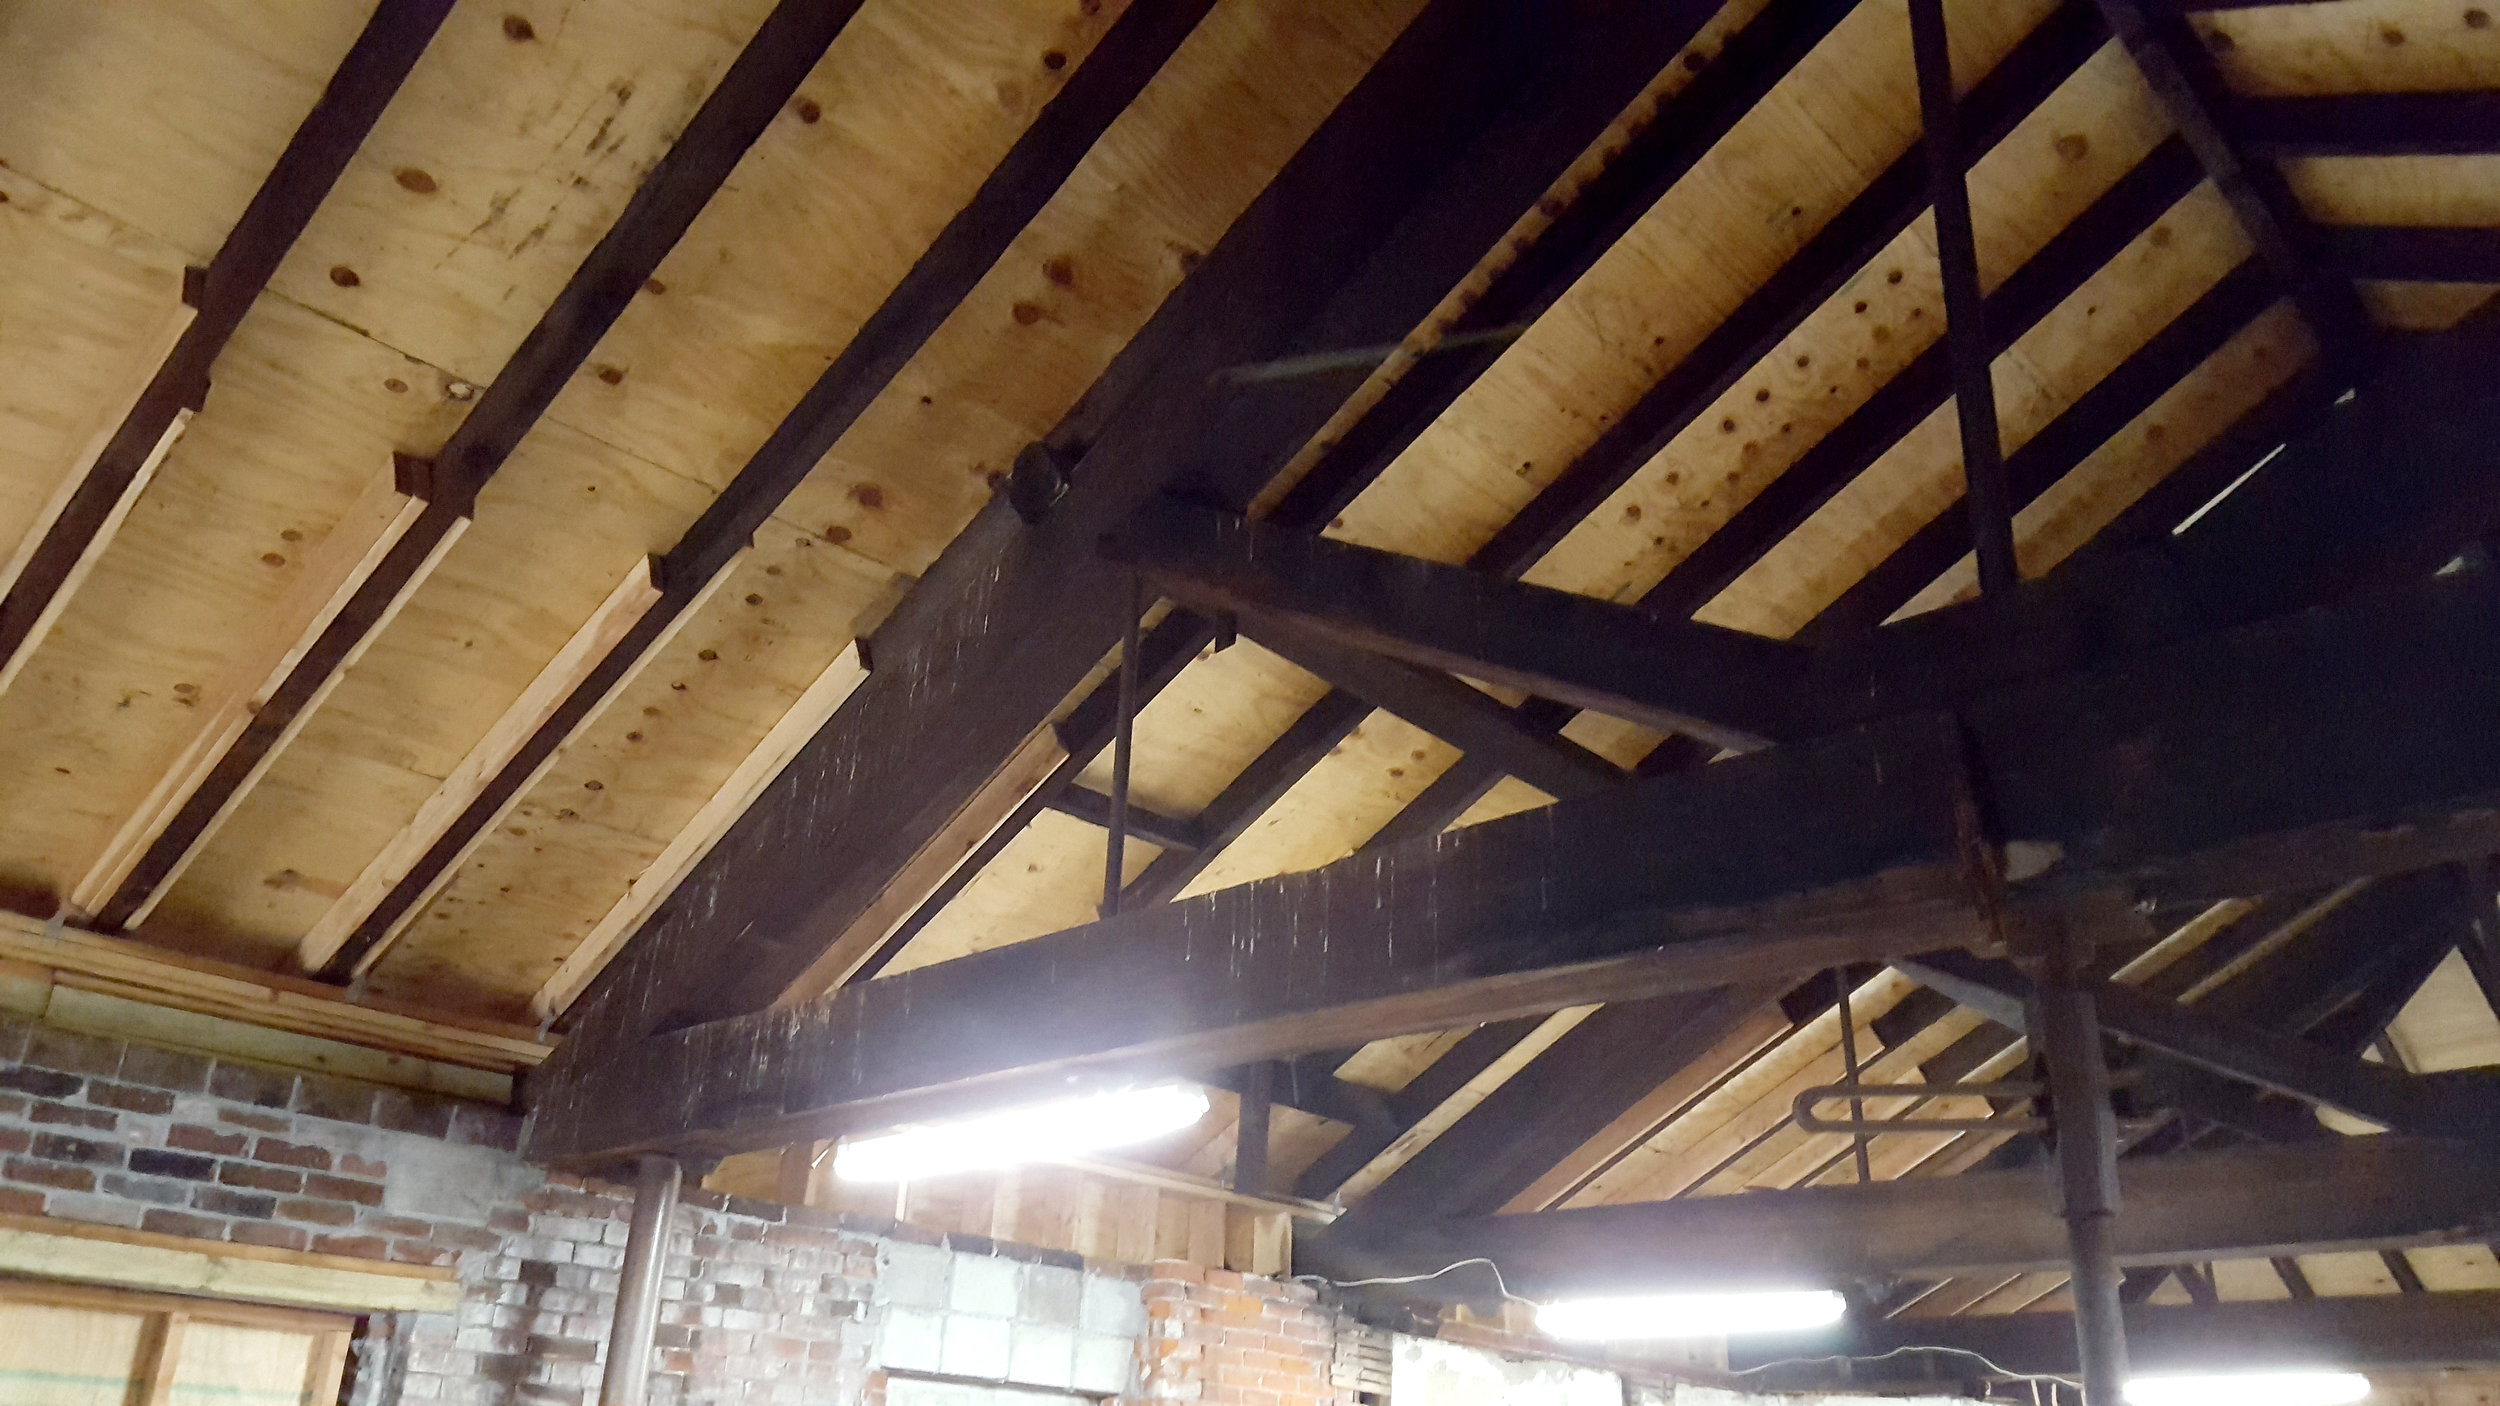 Carriages used to be stored in here; the large roof trusses also hold up the second floor, so that the first floor could be totally open. There